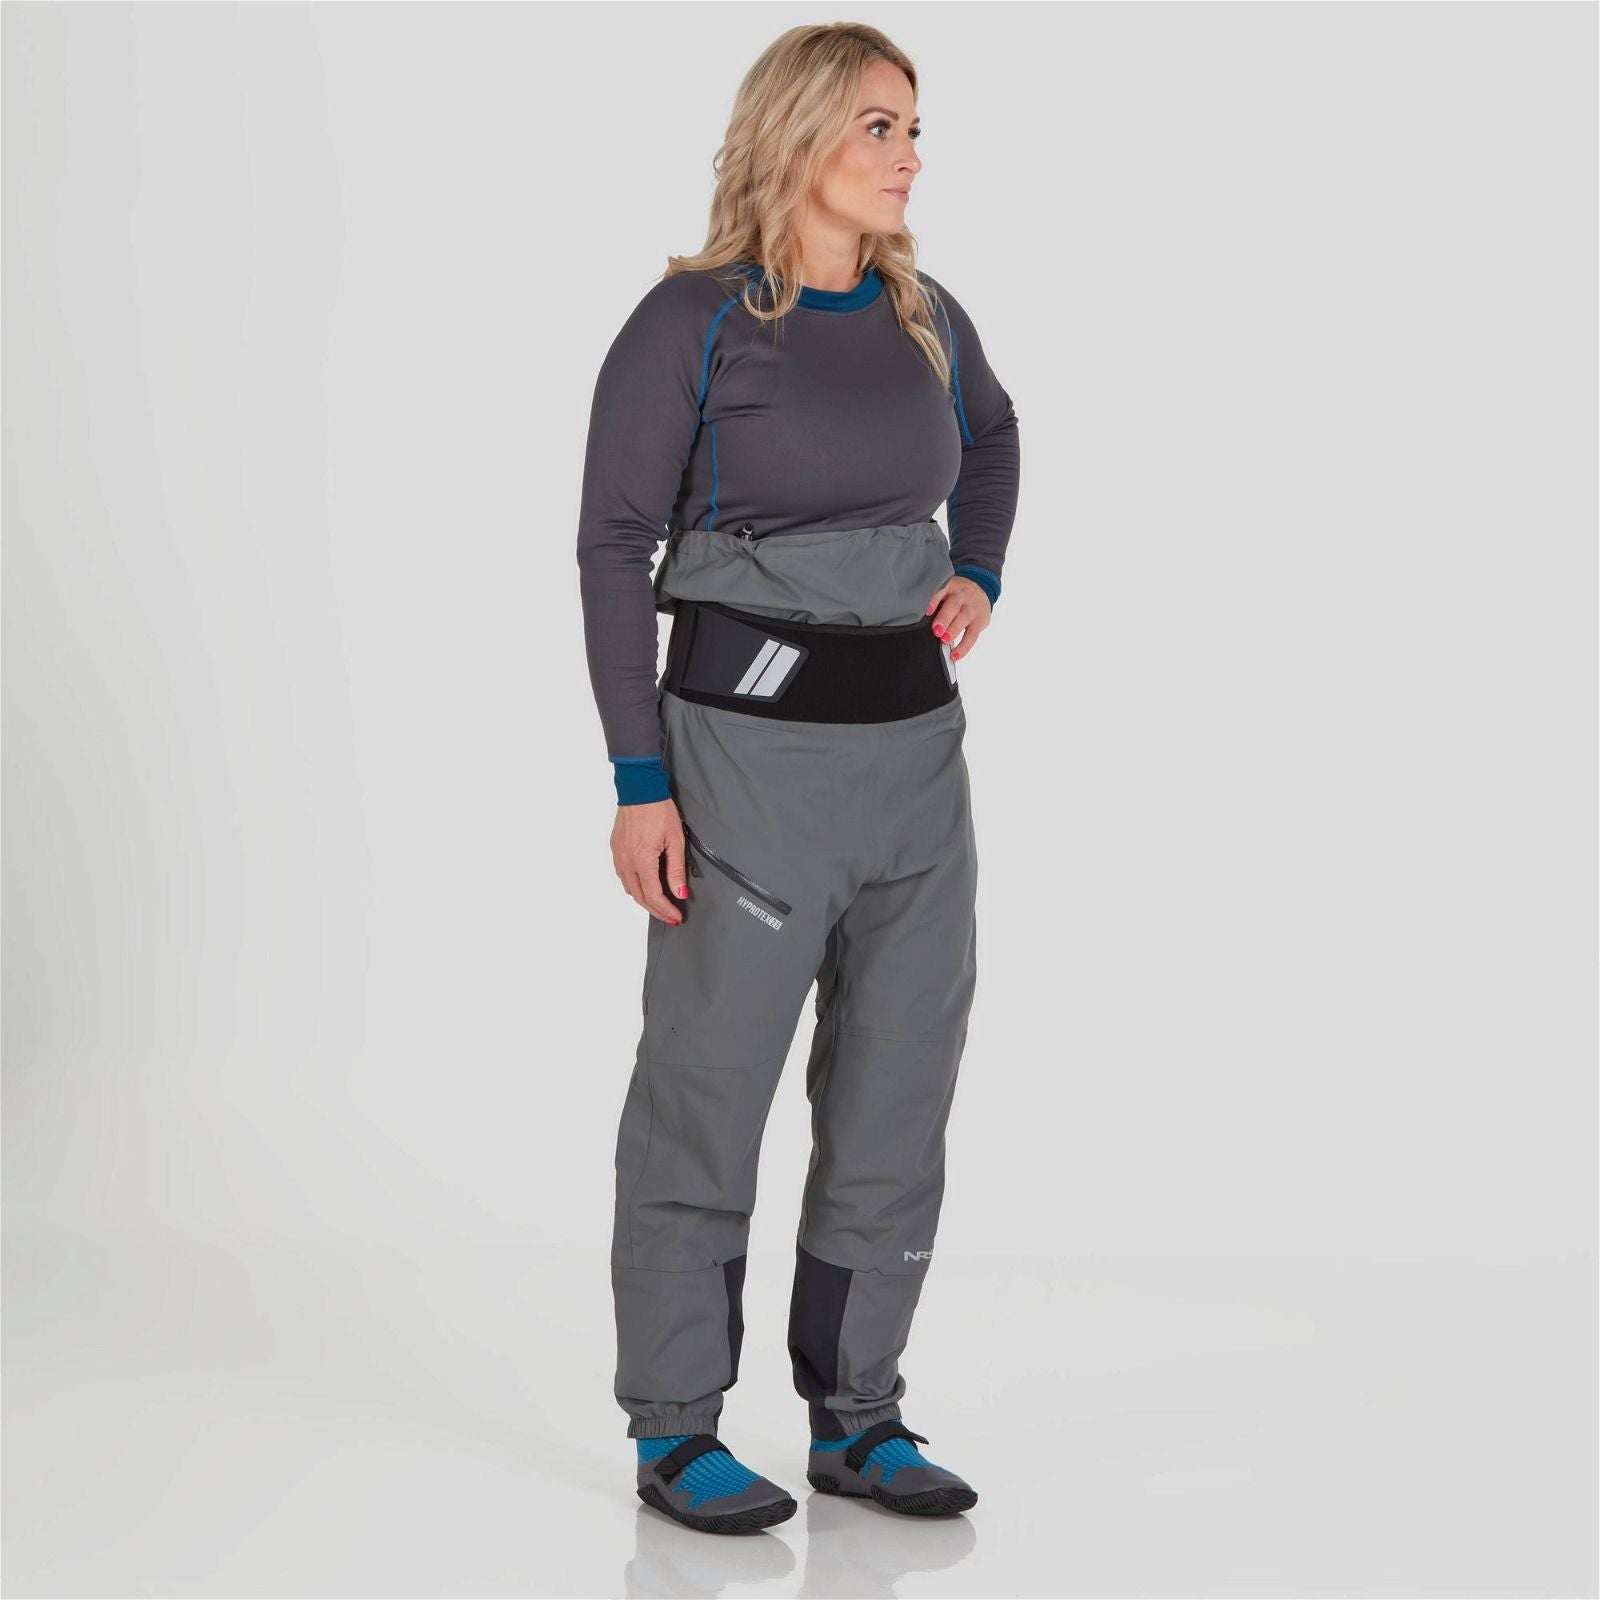   Women's Freefall Dry Pant  BestCoast Outfitters 